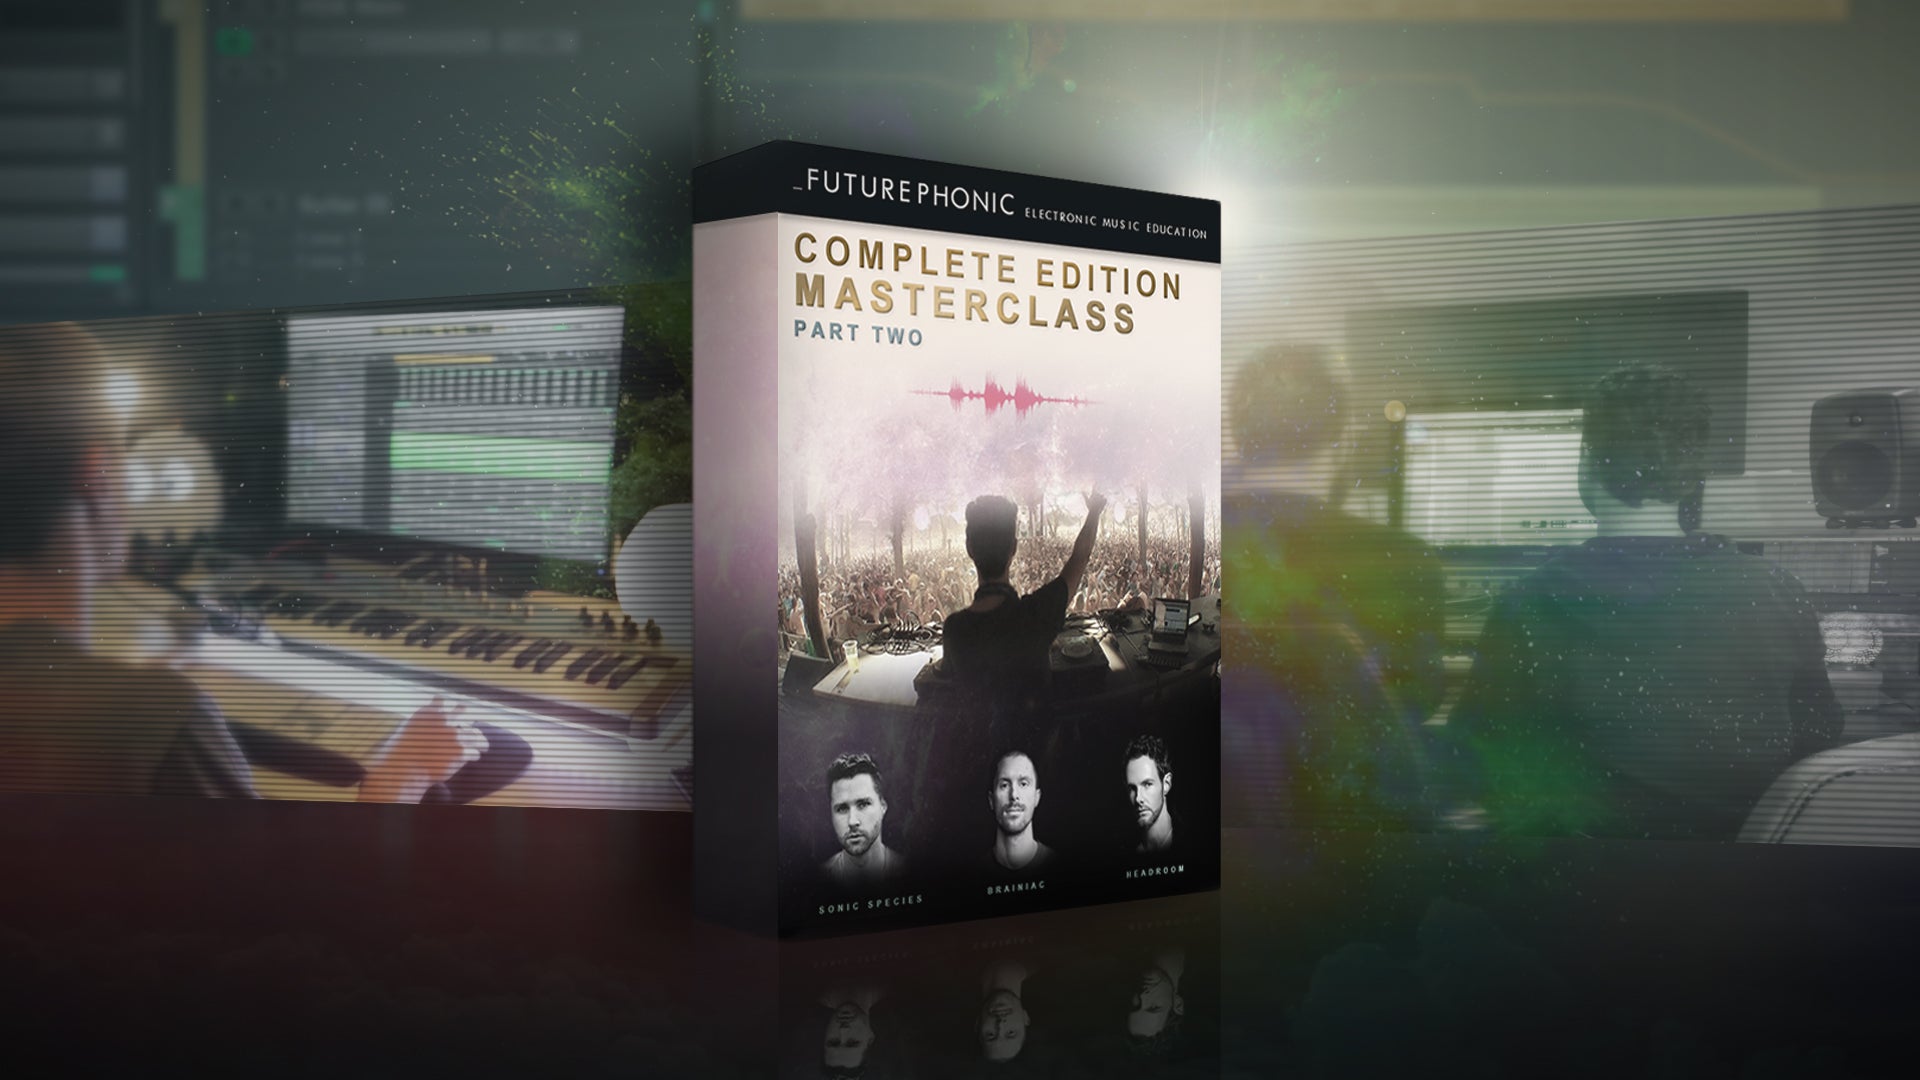 The Complete Edition Masterclass Part Two - Futurephonic